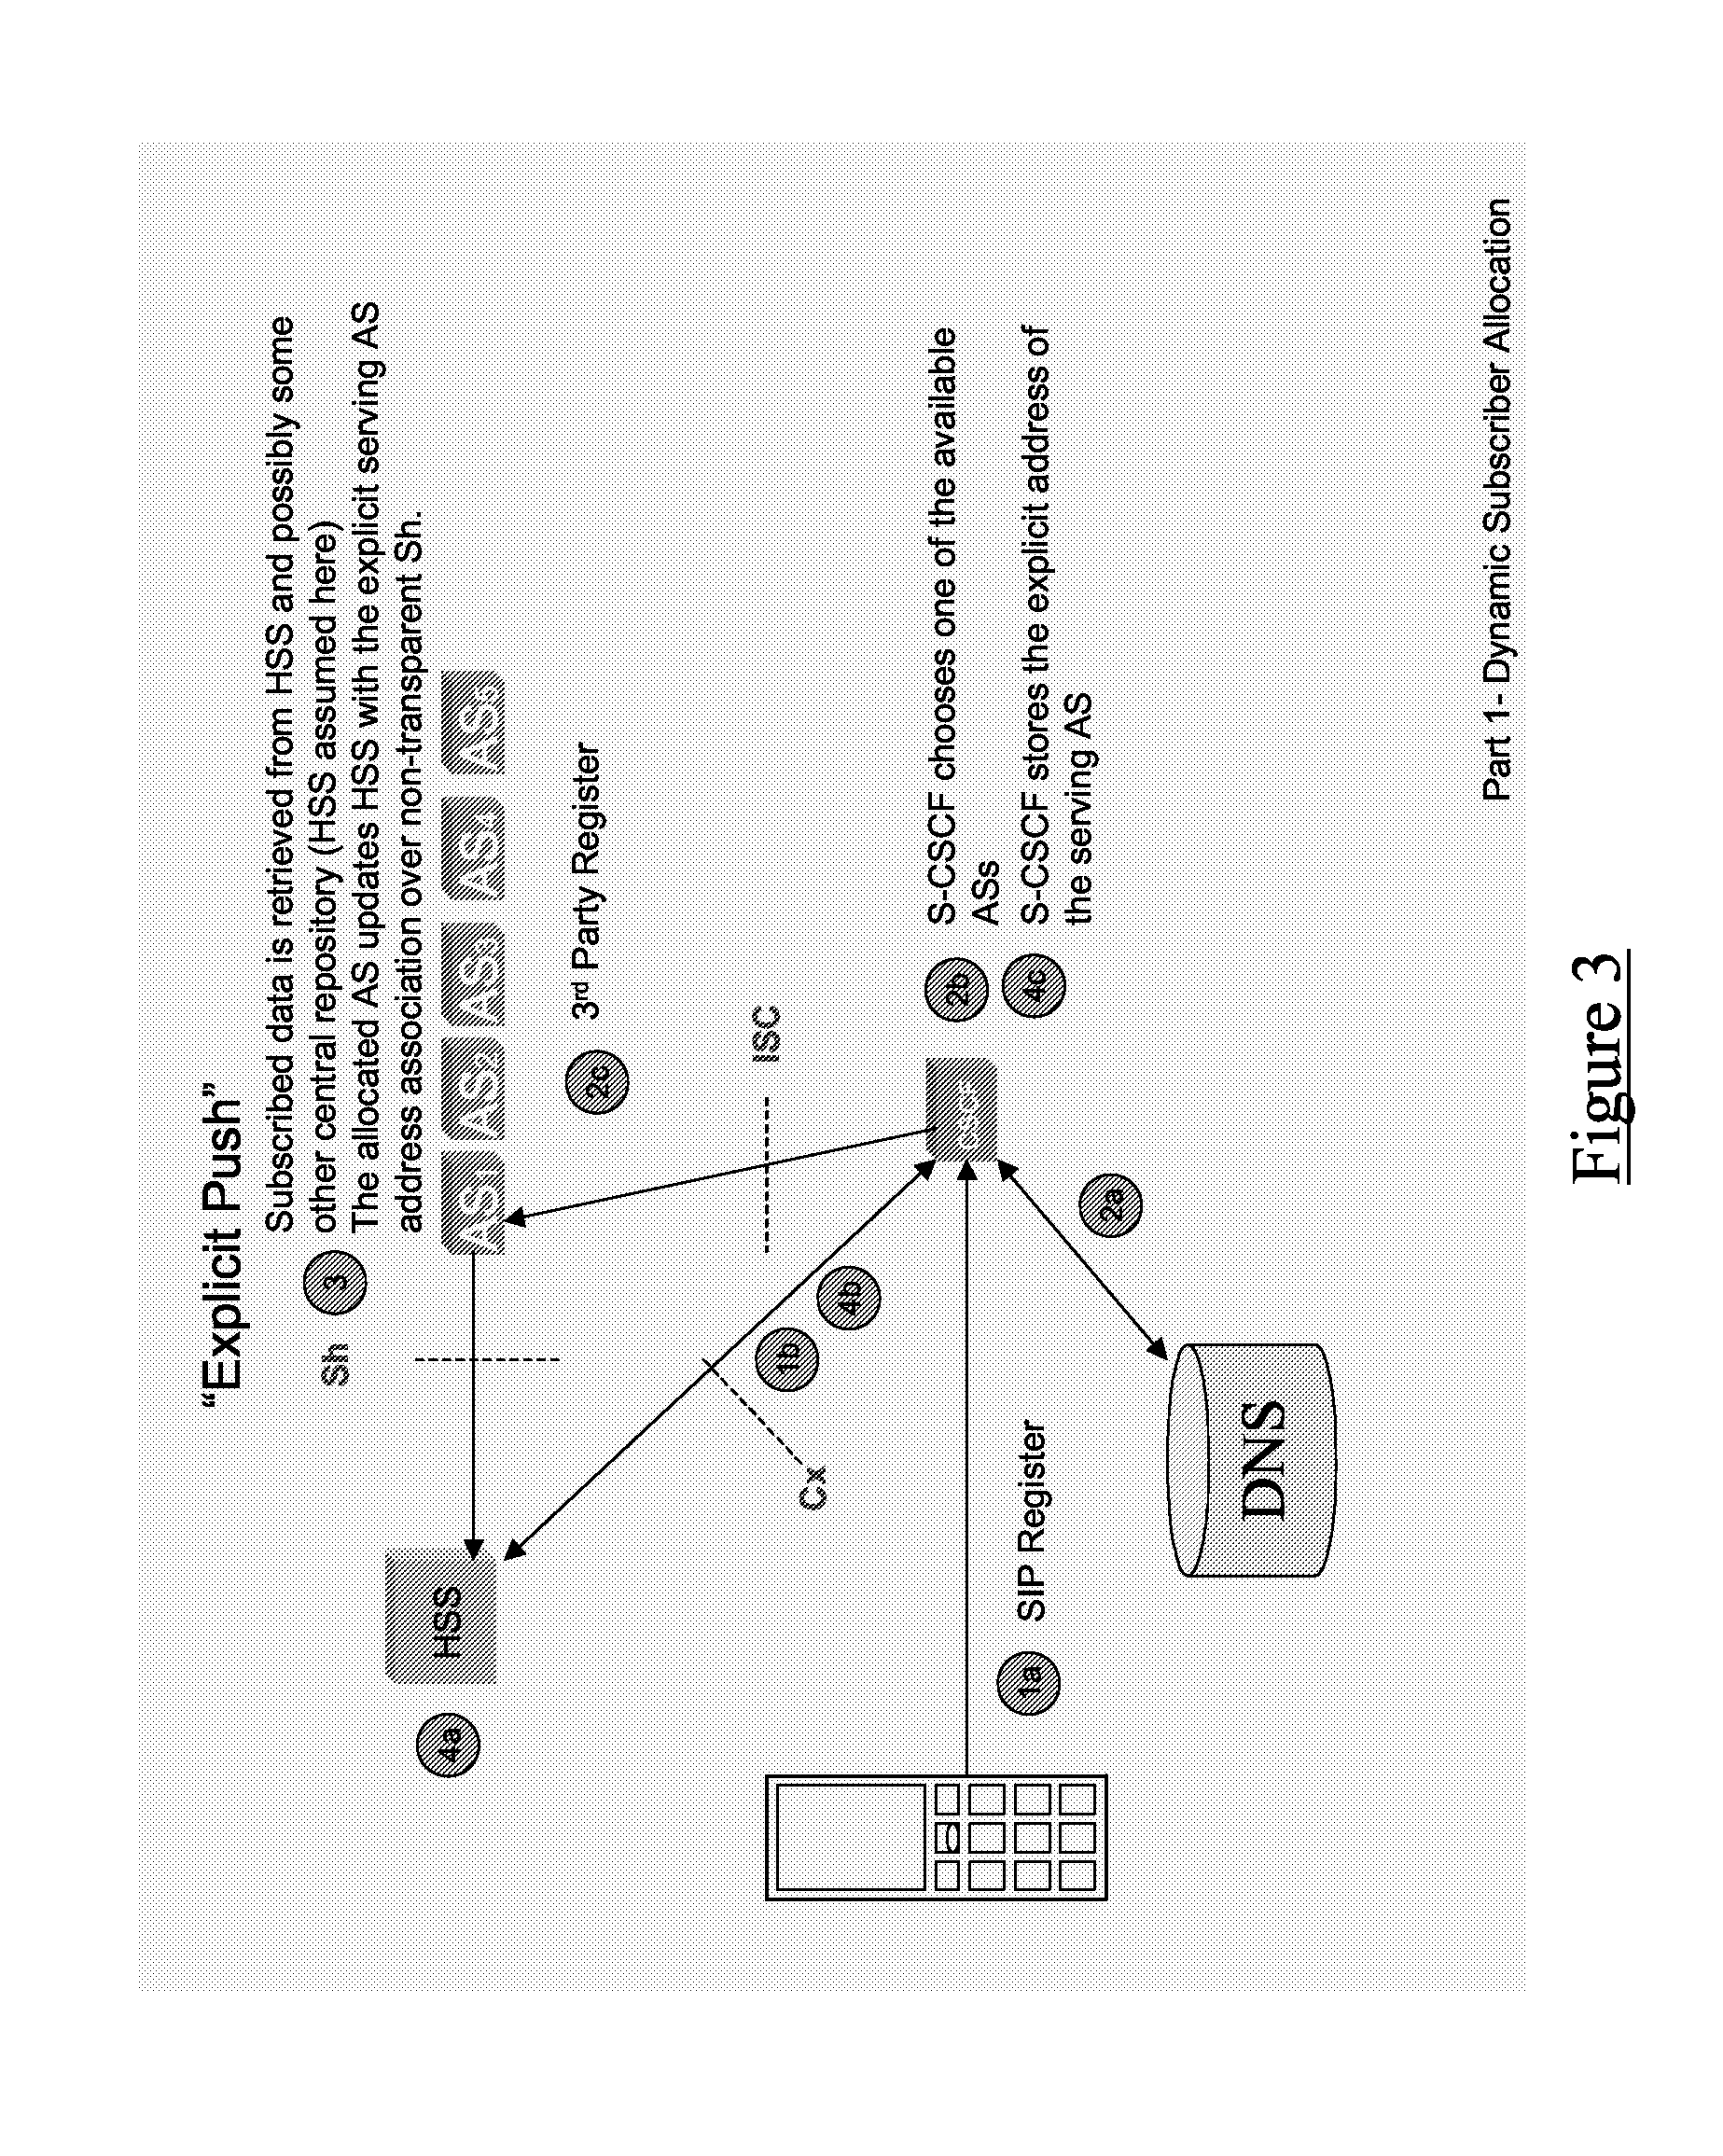 Method and Apparatus for Distributing Application Server Addresses in an Ims